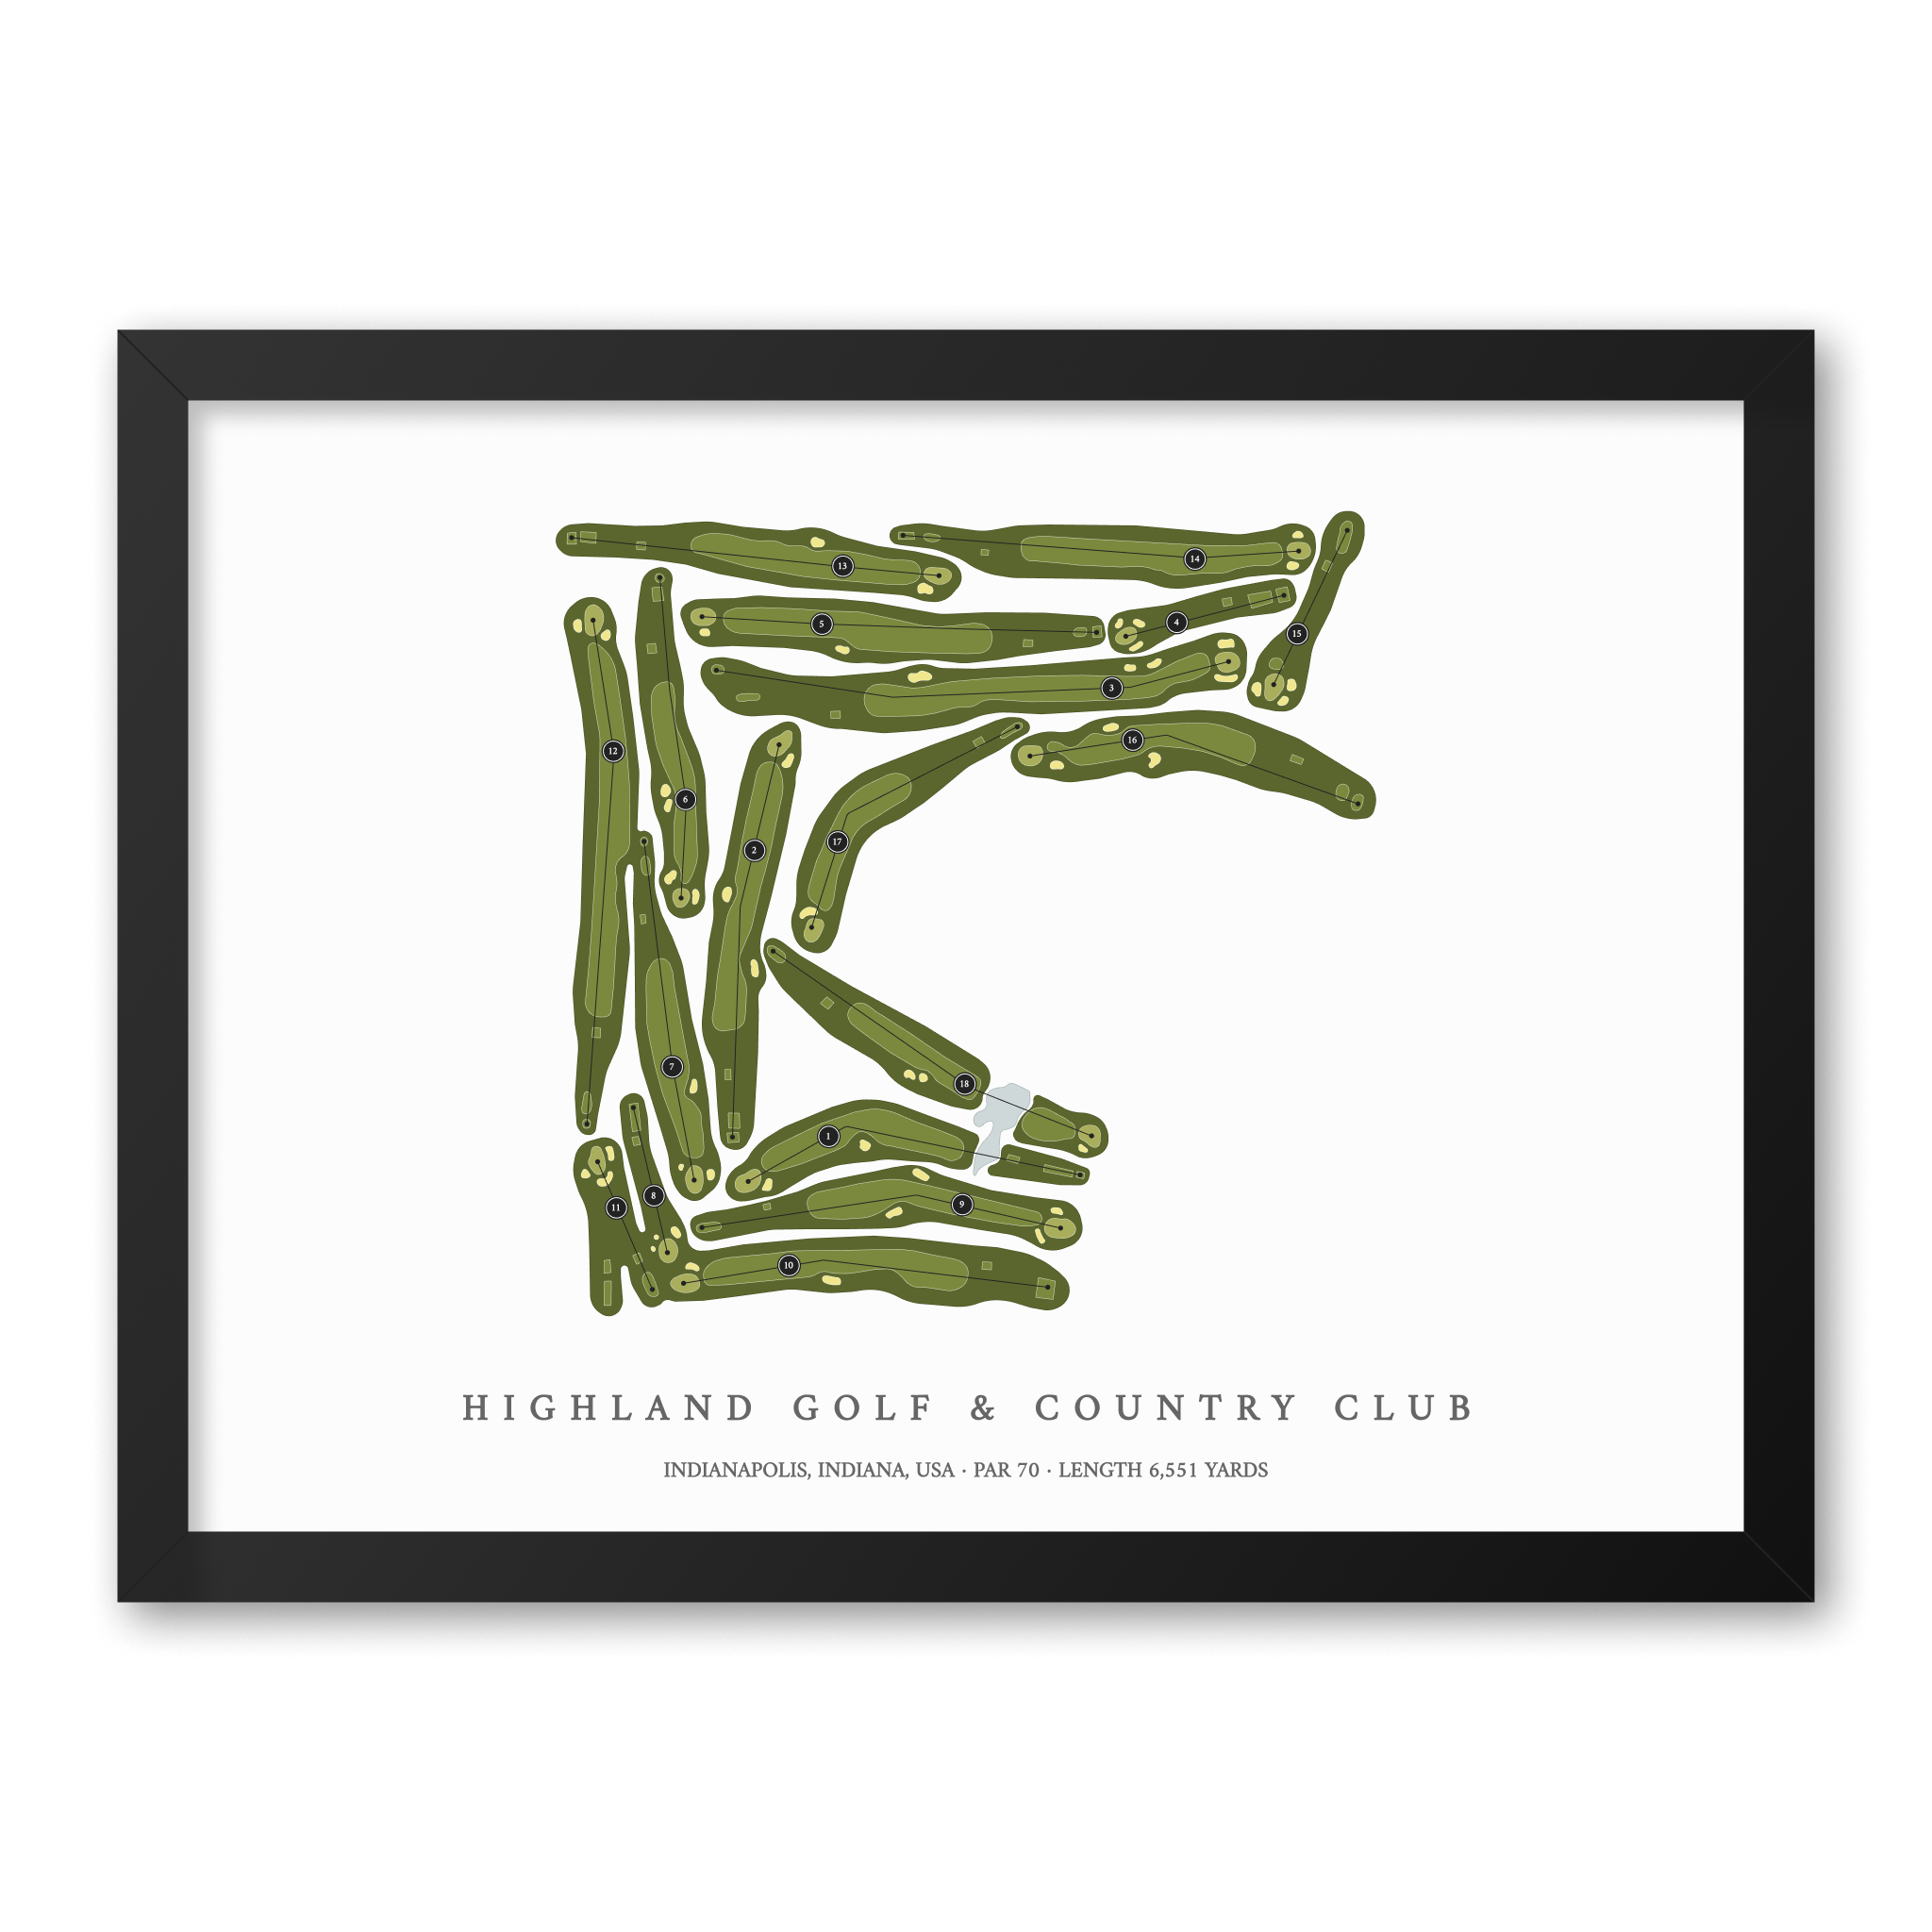 Highland Golf & Country Club | Golf Course Map | Black Frame With Hole Numbers #hole numbers_yes